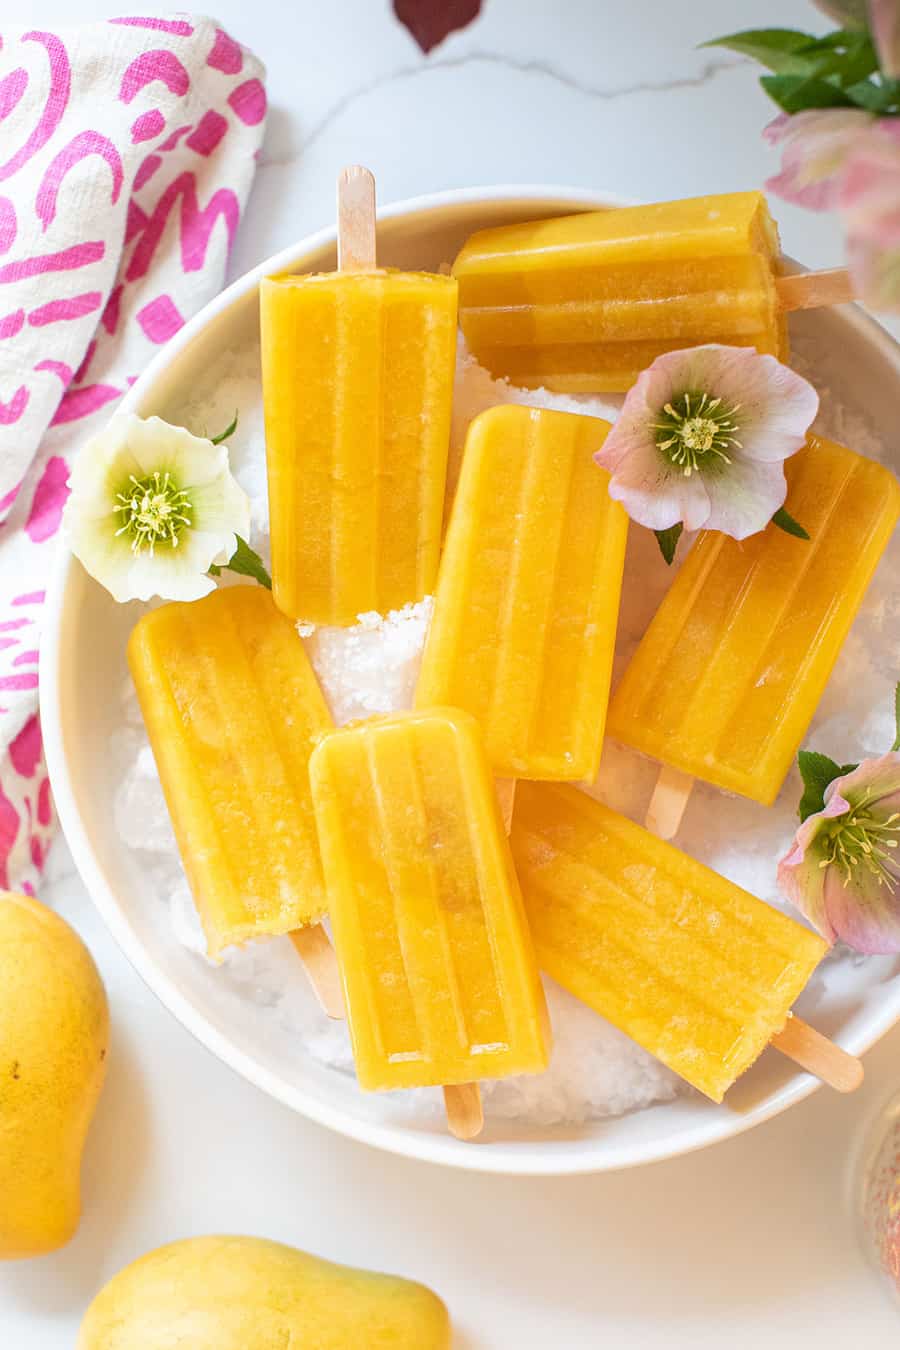 Mango popsicle recipe in a bowl with pretty flowers.